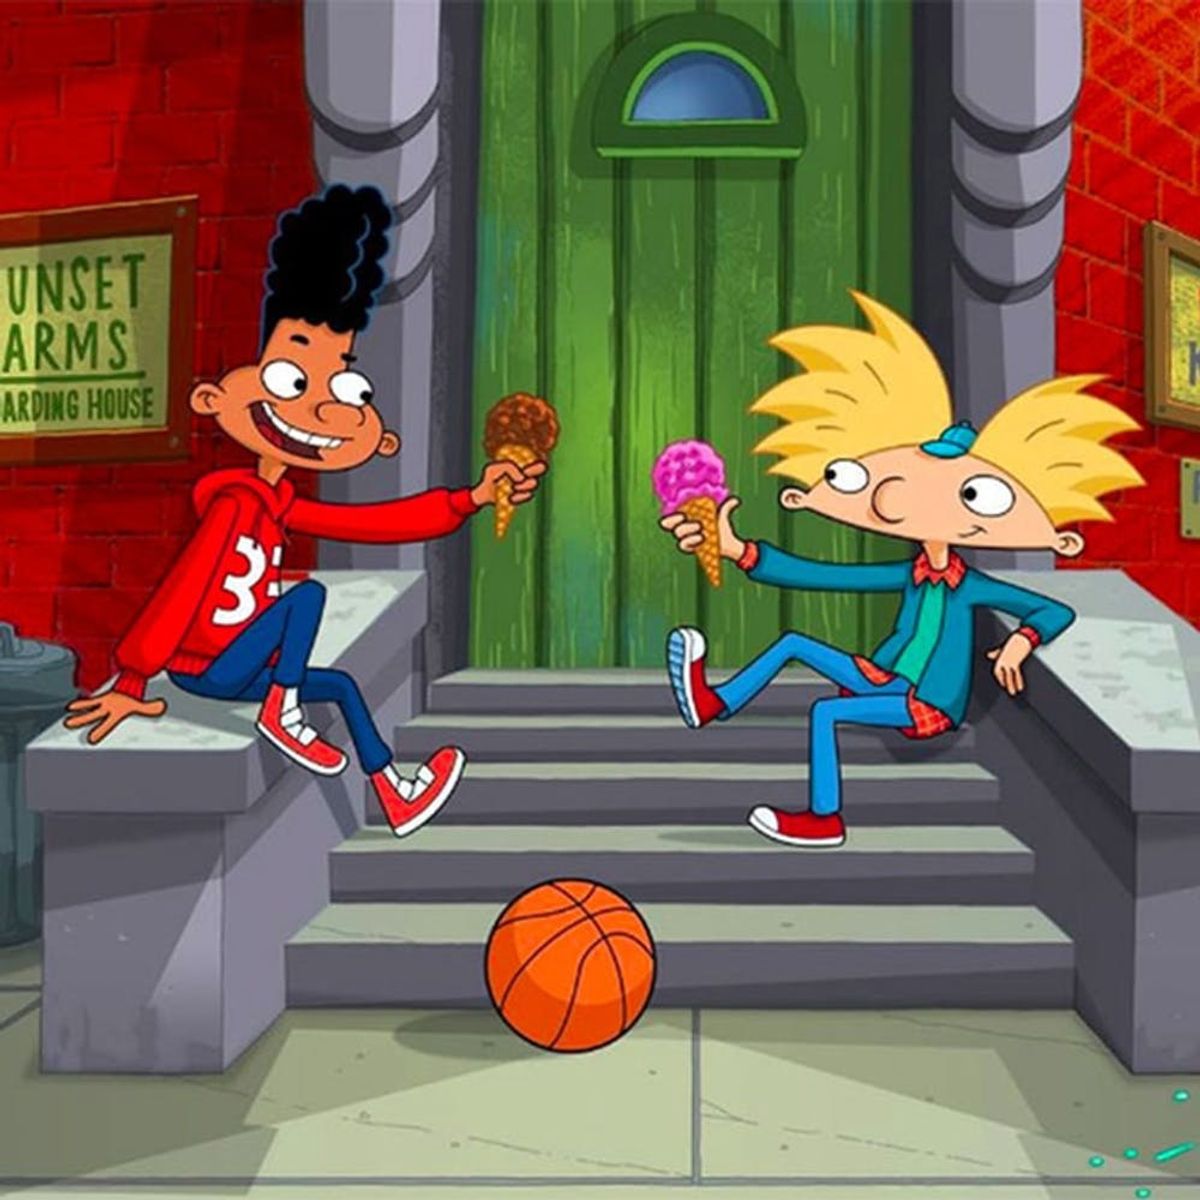 We Now Have More Details About Nickelodeon’s Hey Arnold! Movie